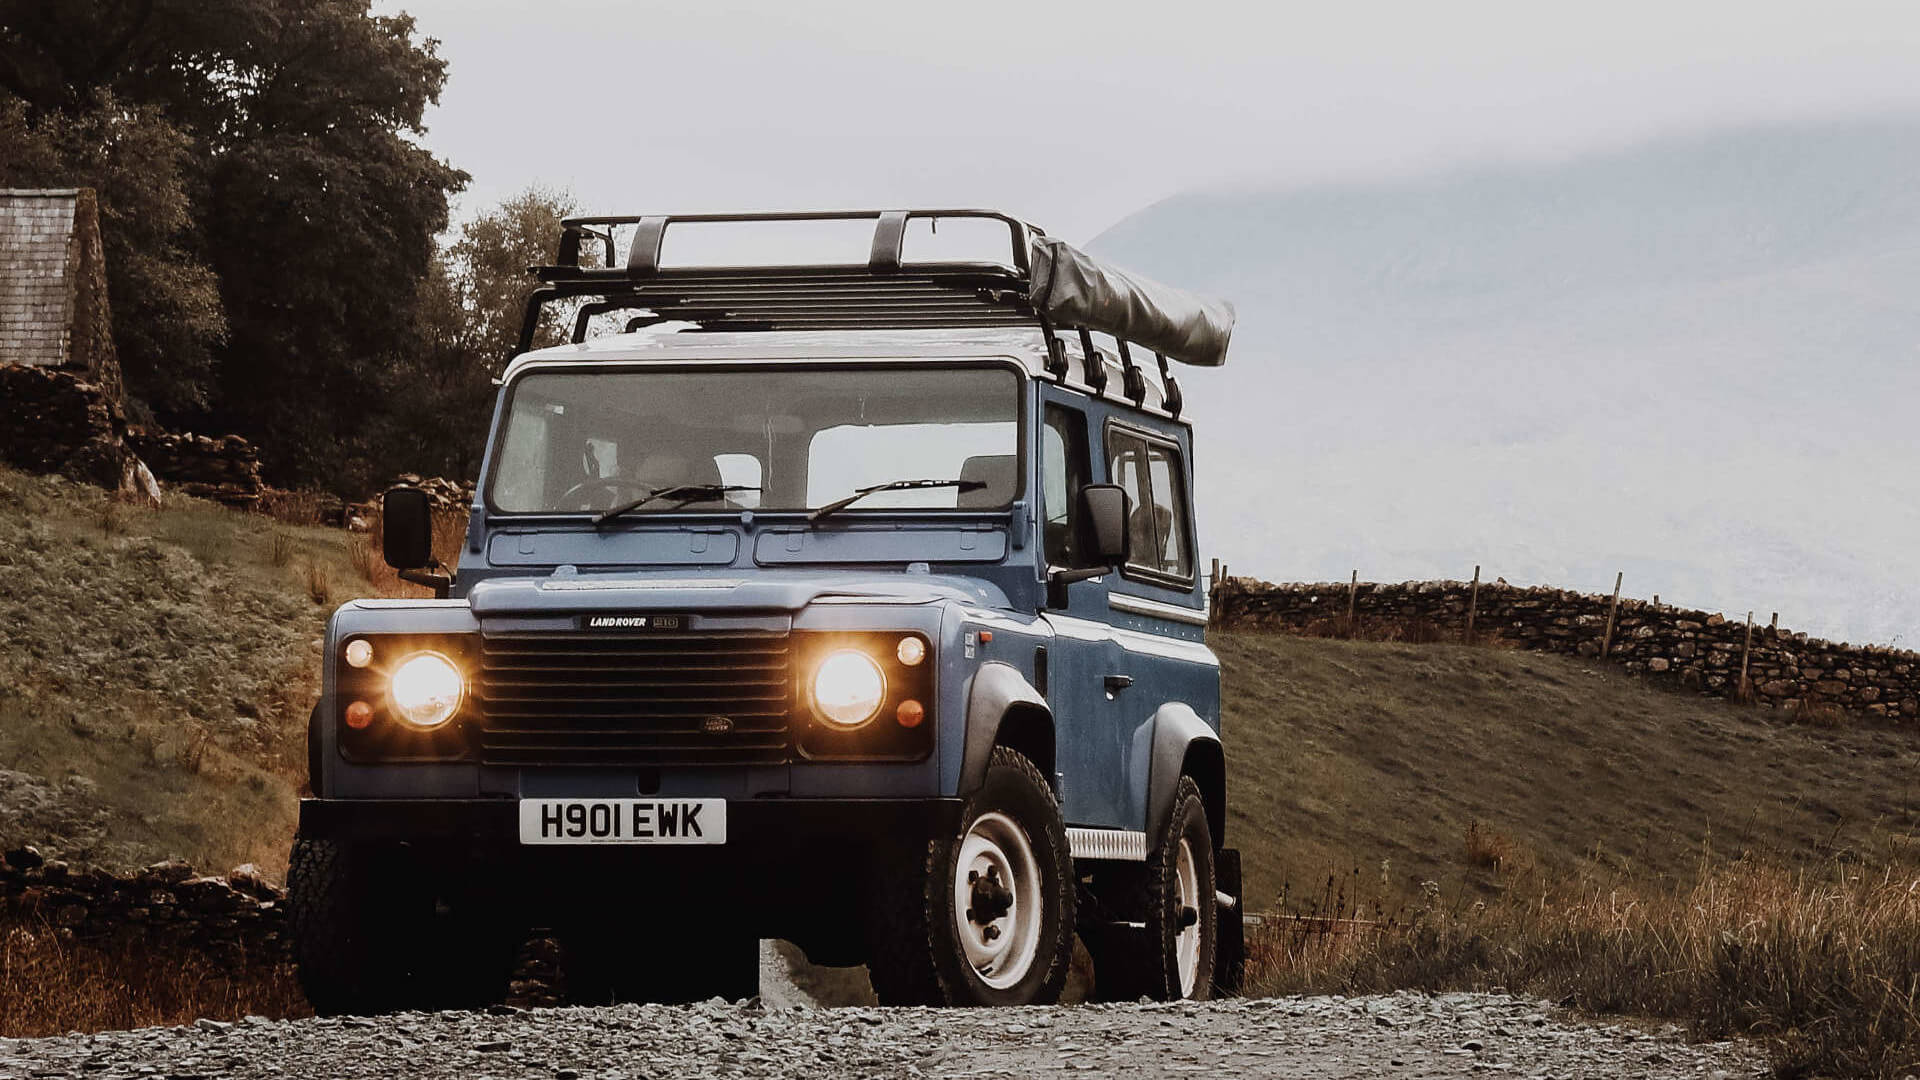 Direct4x4 Accessories for Land Rover Defender Vehicles